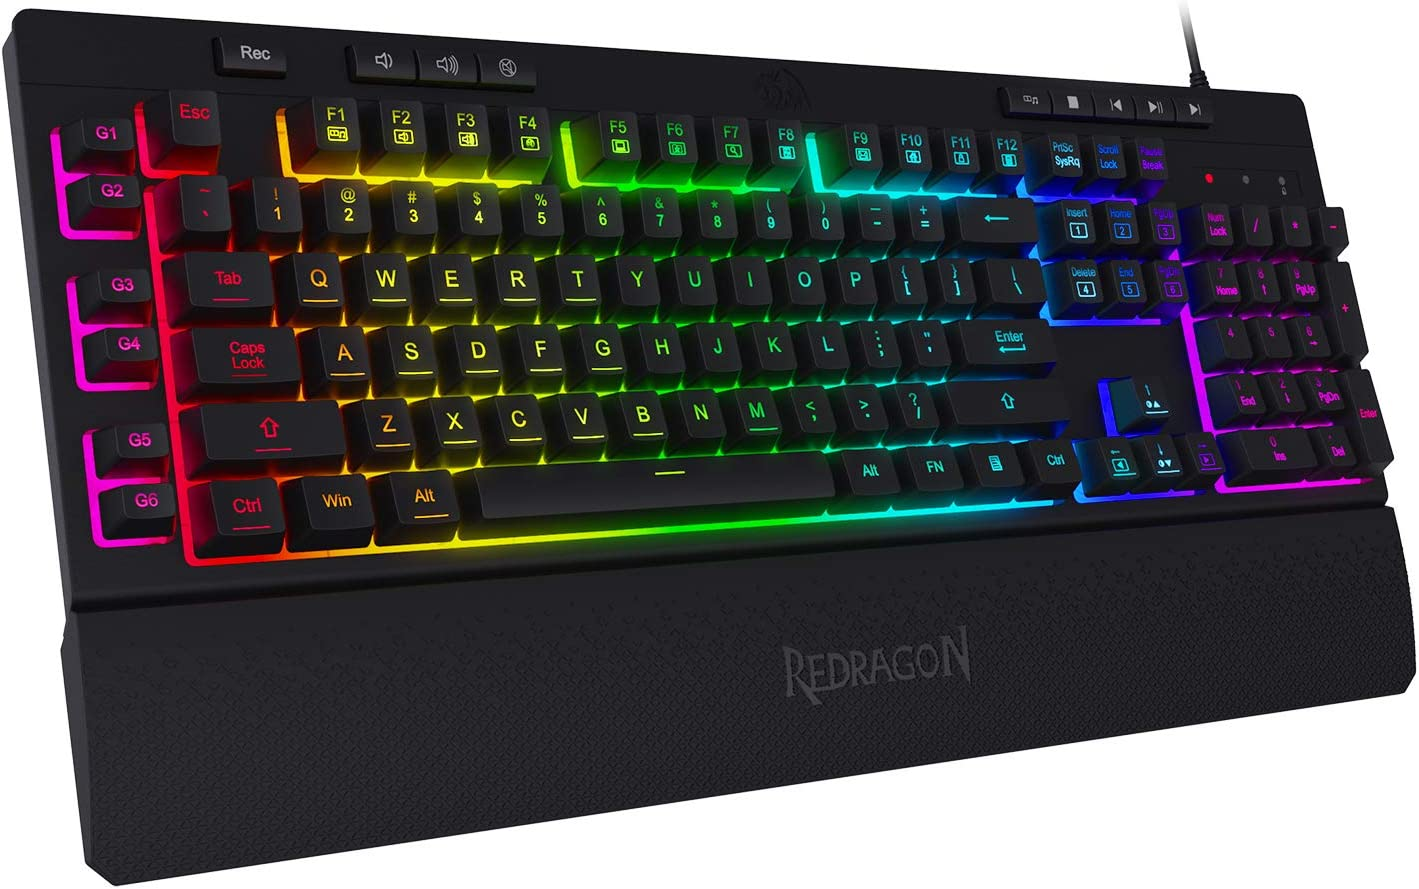 A full-size gaming keyboard is best if you would like to have all function keys and numeric keys available for use.